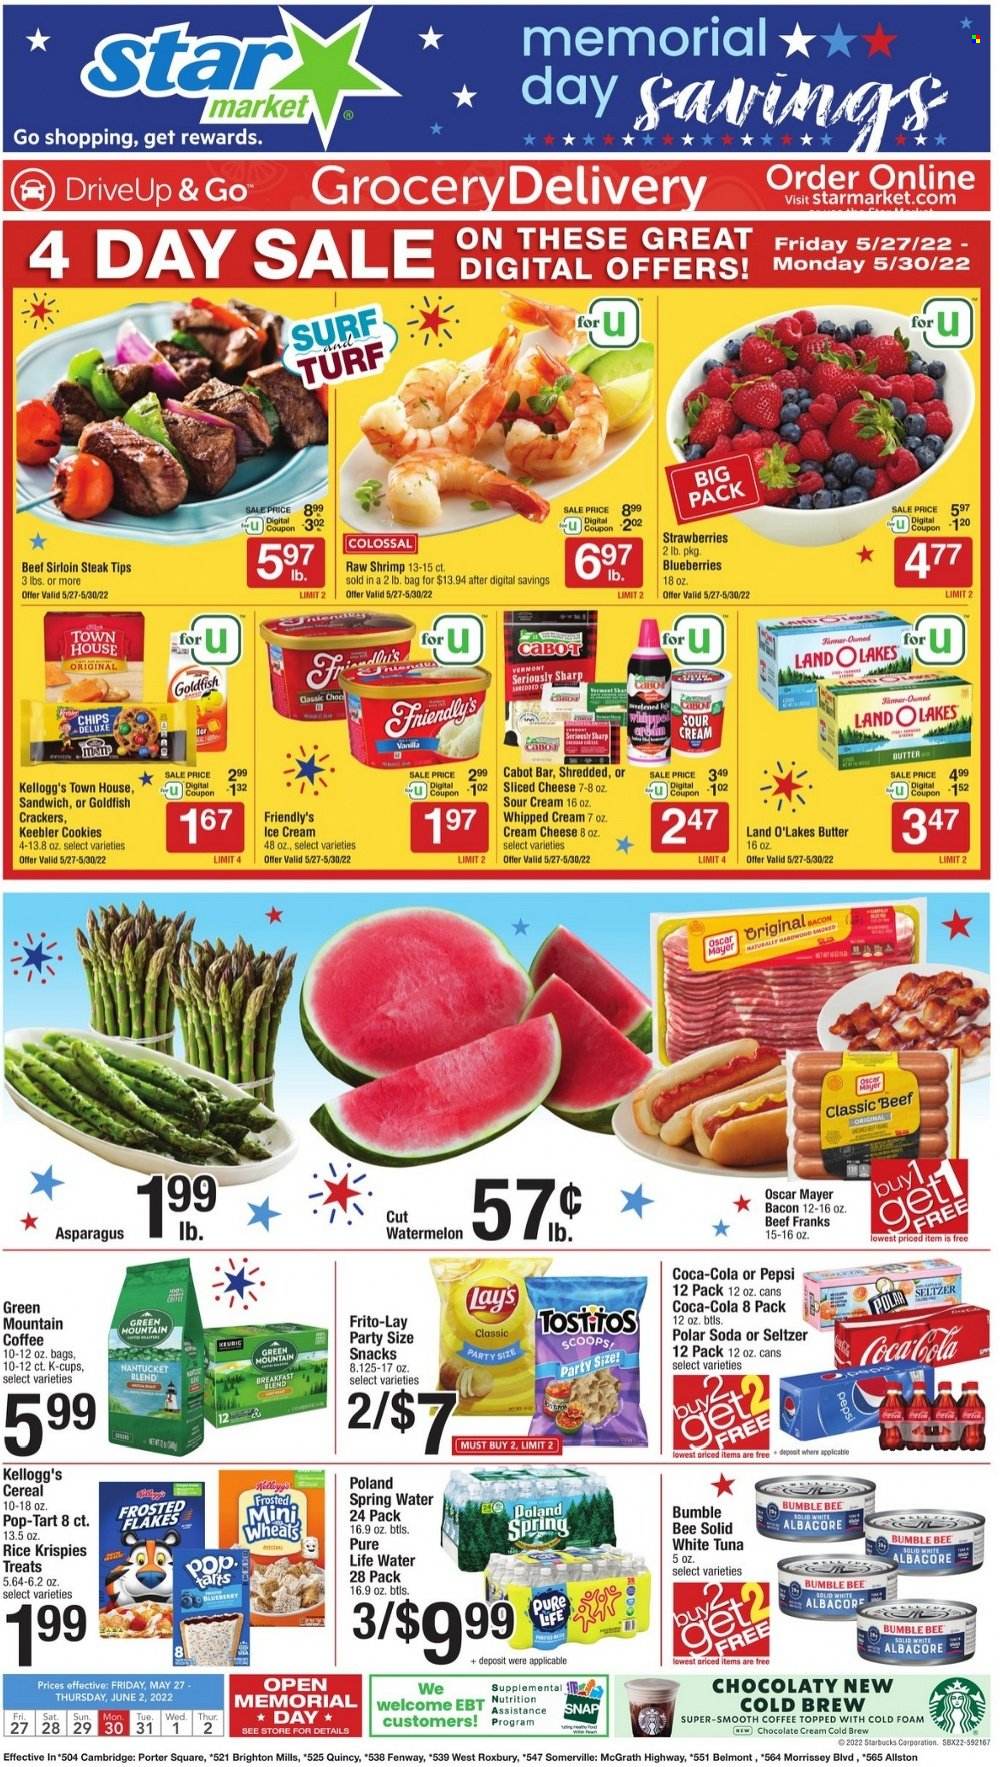 thumbnail - Star Market Flyer - 05/27/2022 - 06/02/2022 - Sales products - tart, asparagus, blueberries, strawberries, watermelon, tuna, shrimps, sandwich, Bumble Bee, bacon, Oscar Mayer, cream cheese, sliced cheese, cheese, butter, sour cream, whipped cream, ice cream, Friendly's Ice Cream, cookies, snack, crackers, Kellogg's, Keebler, chips, Lay’s, Goldfish, Frito-Lay, cereals, Rice Krispies, Frosted Flakes, Coca-Cola, Pepsi, seltzer water, spring water, soda, Pure Life Water, coffee, Starbucks, coffee capsules, K-Cups, Green Mountain, beef meat, beef sirloin, steak, sirloin steak. Page 1.